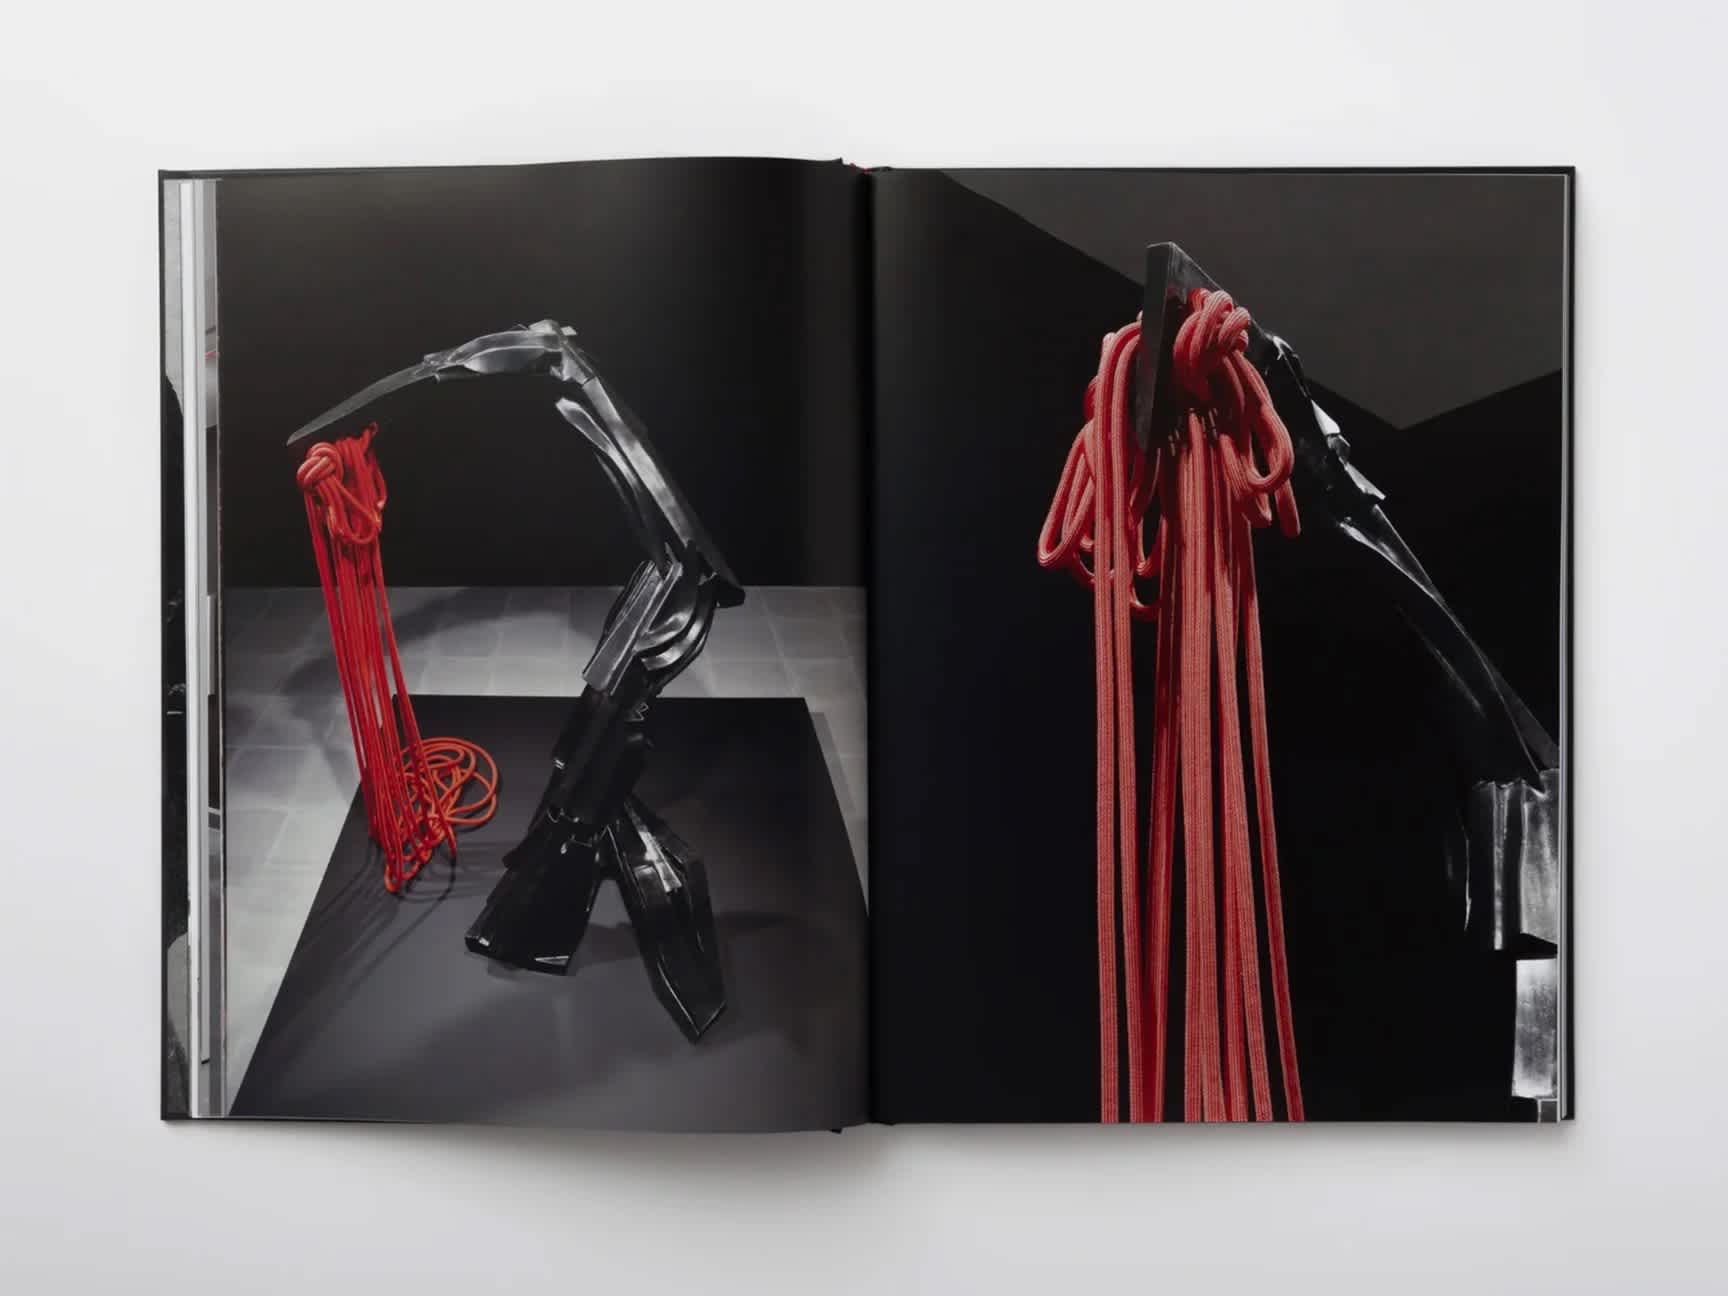 Two black metal sculptures holding long red rope in black rooms. The images of each sculpture are on opposite pages of a book.